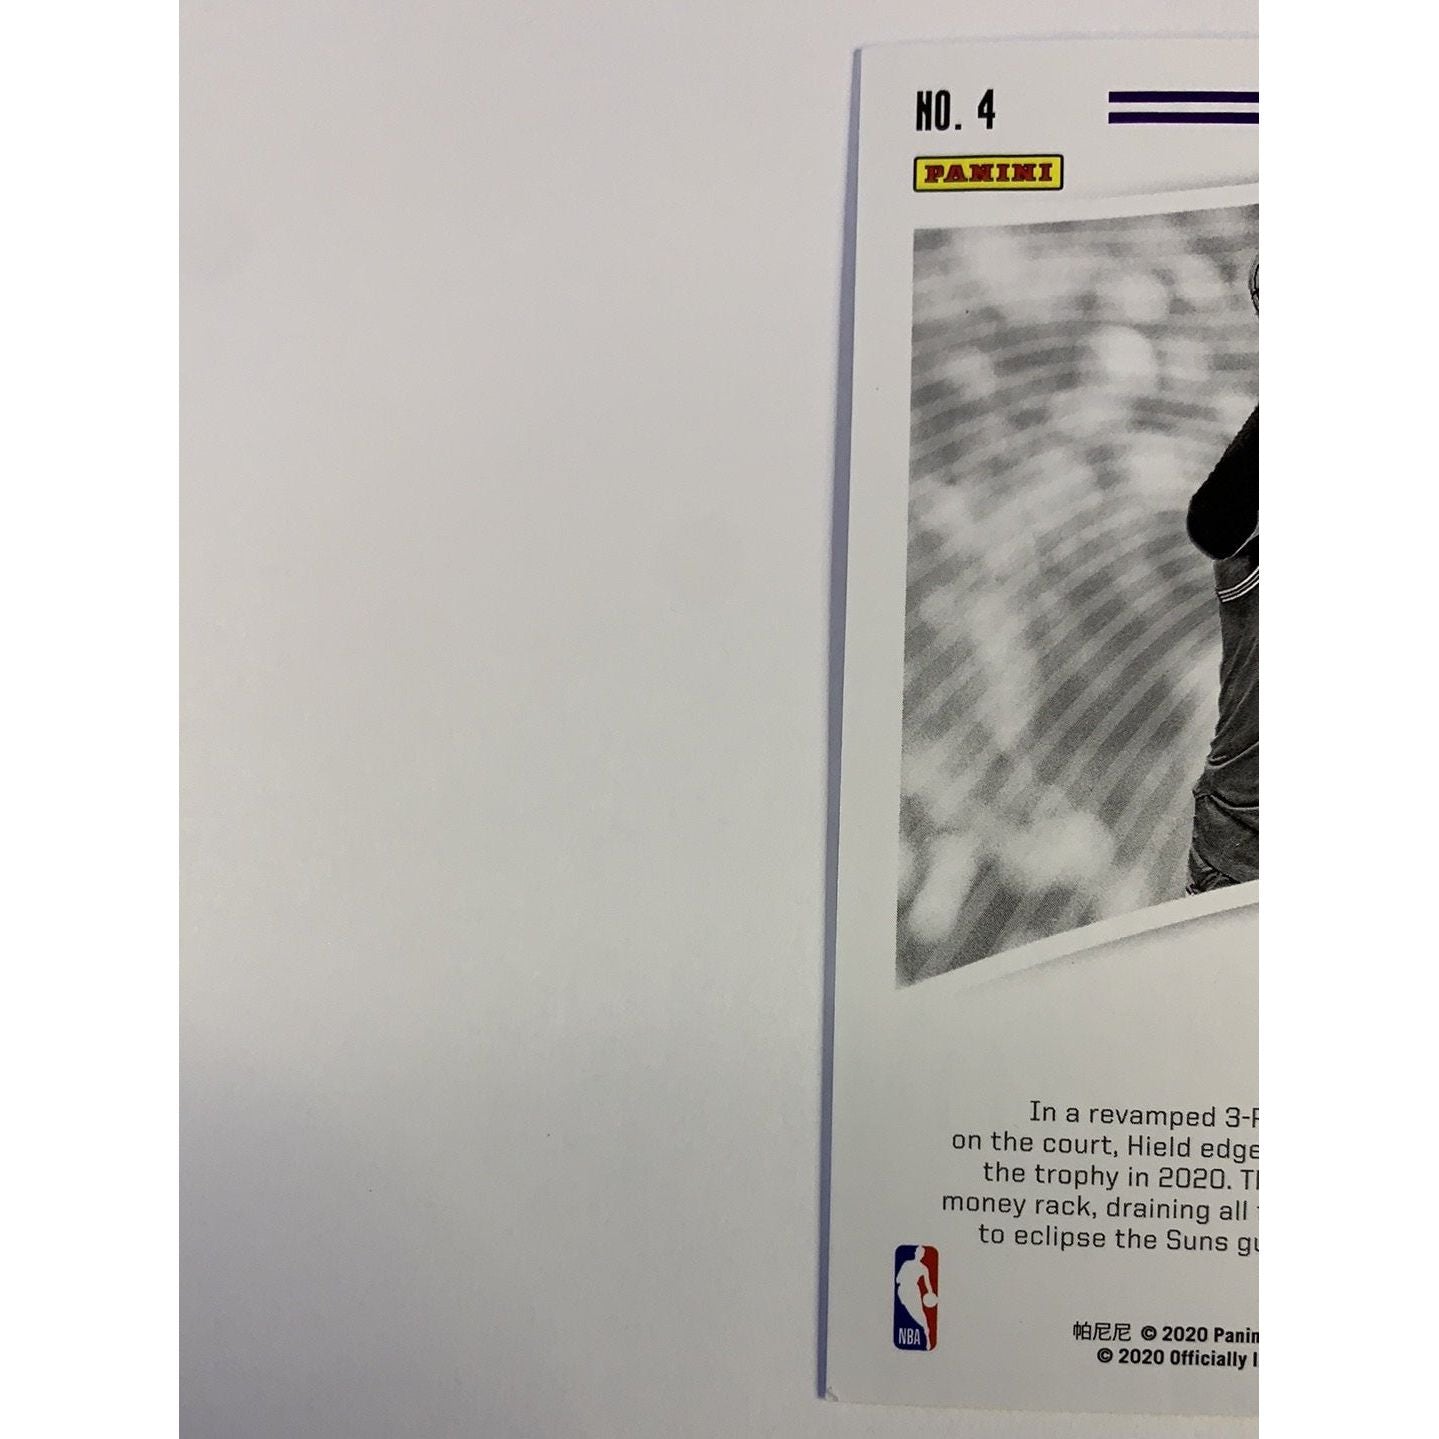  2019-20 Illusions Season Highlights Buddy Hield  Local Legends Cards & Collectibles